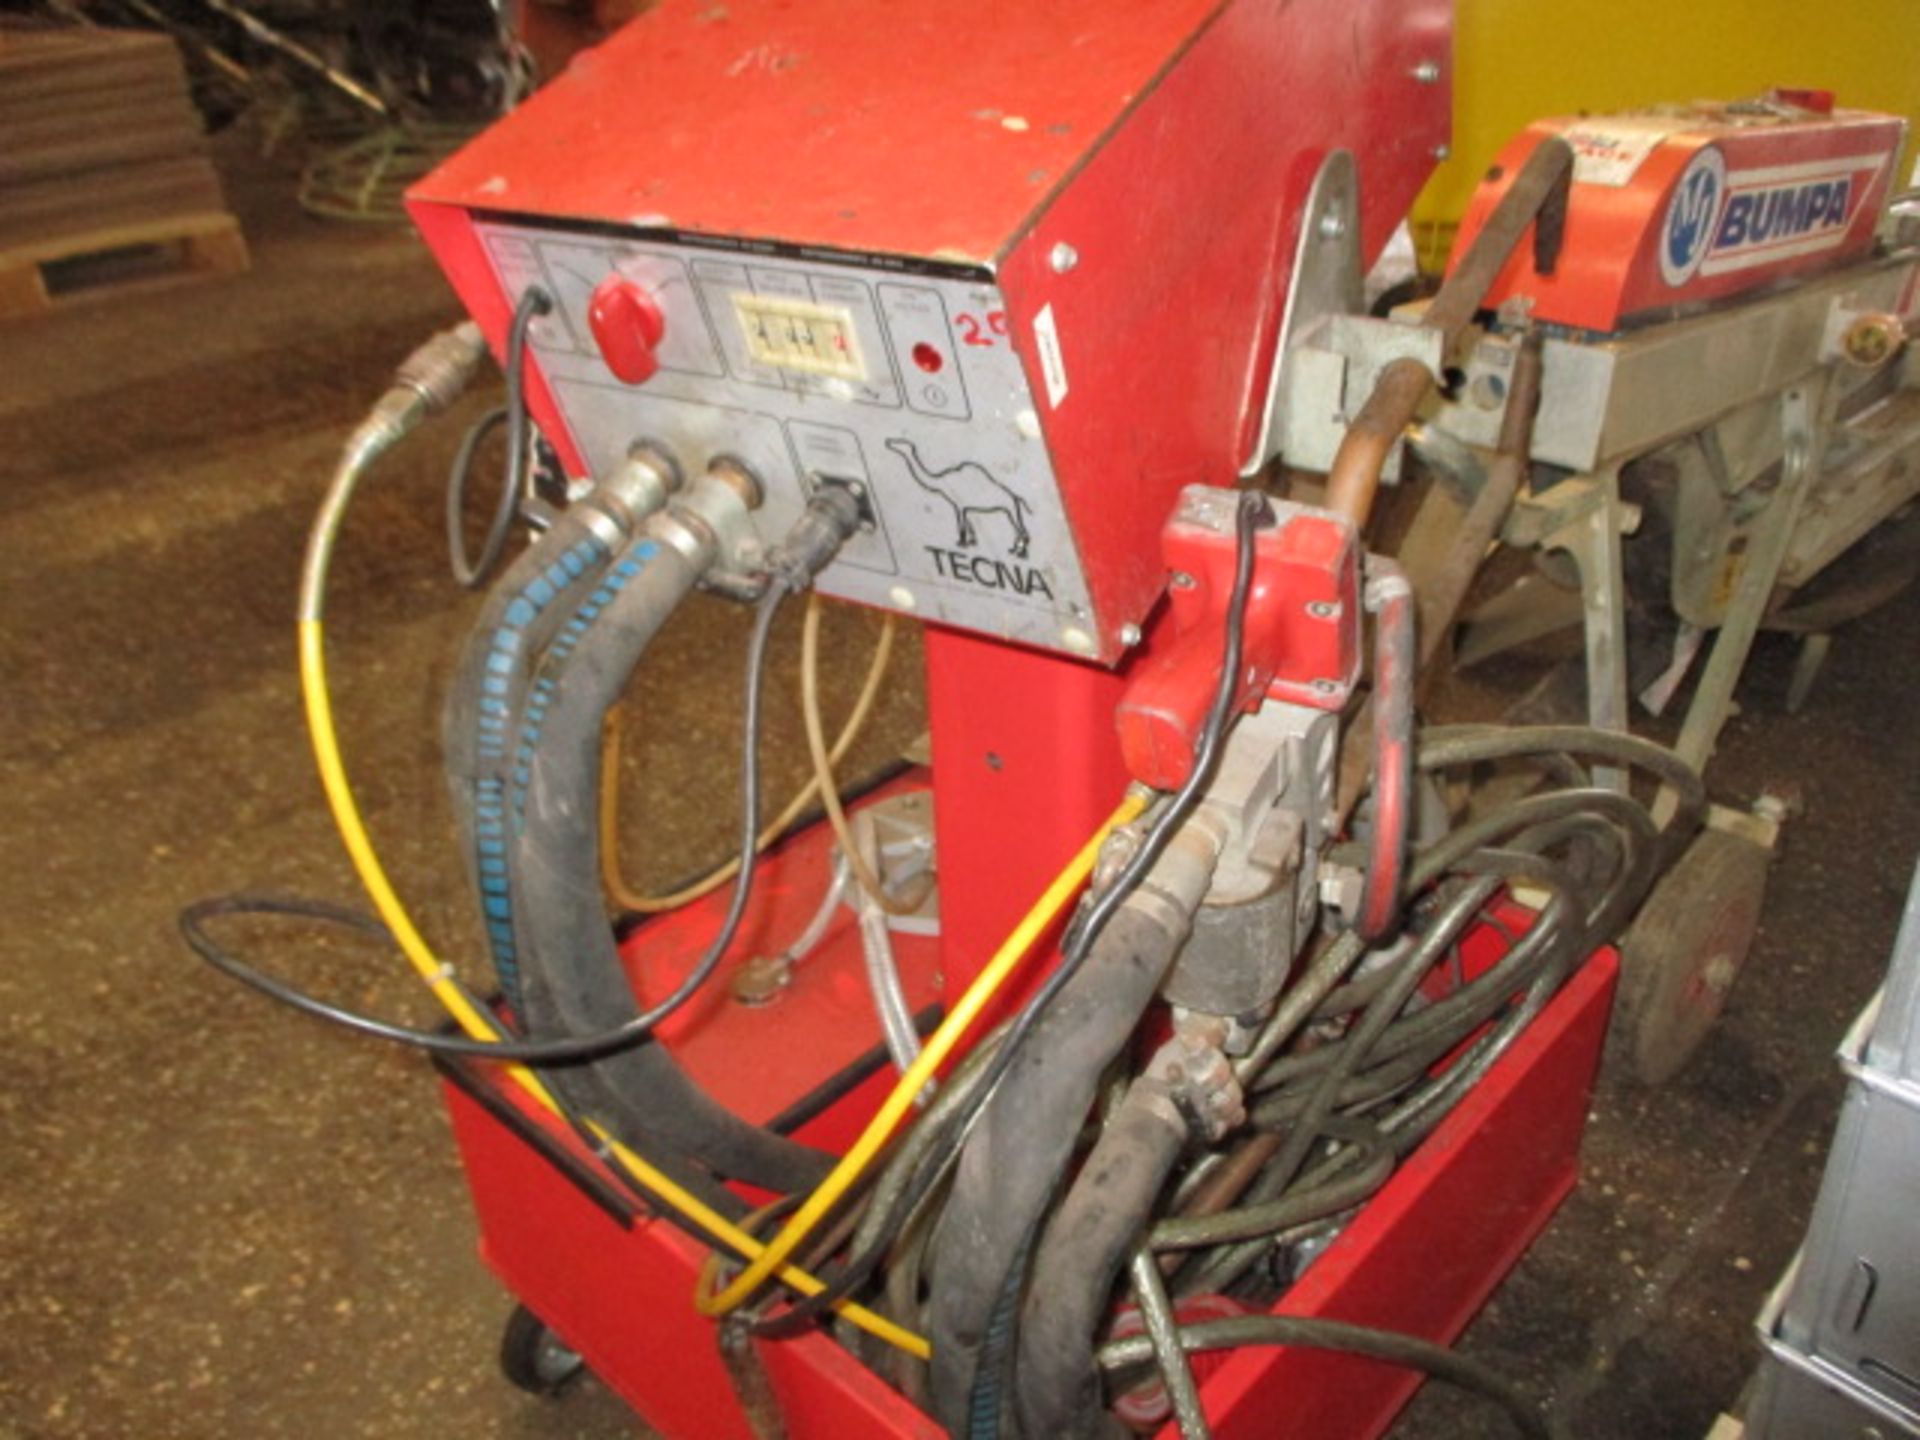 Tecna 520134 spot welder 3 phase with 2 sets of jaws - Image 2 of 2